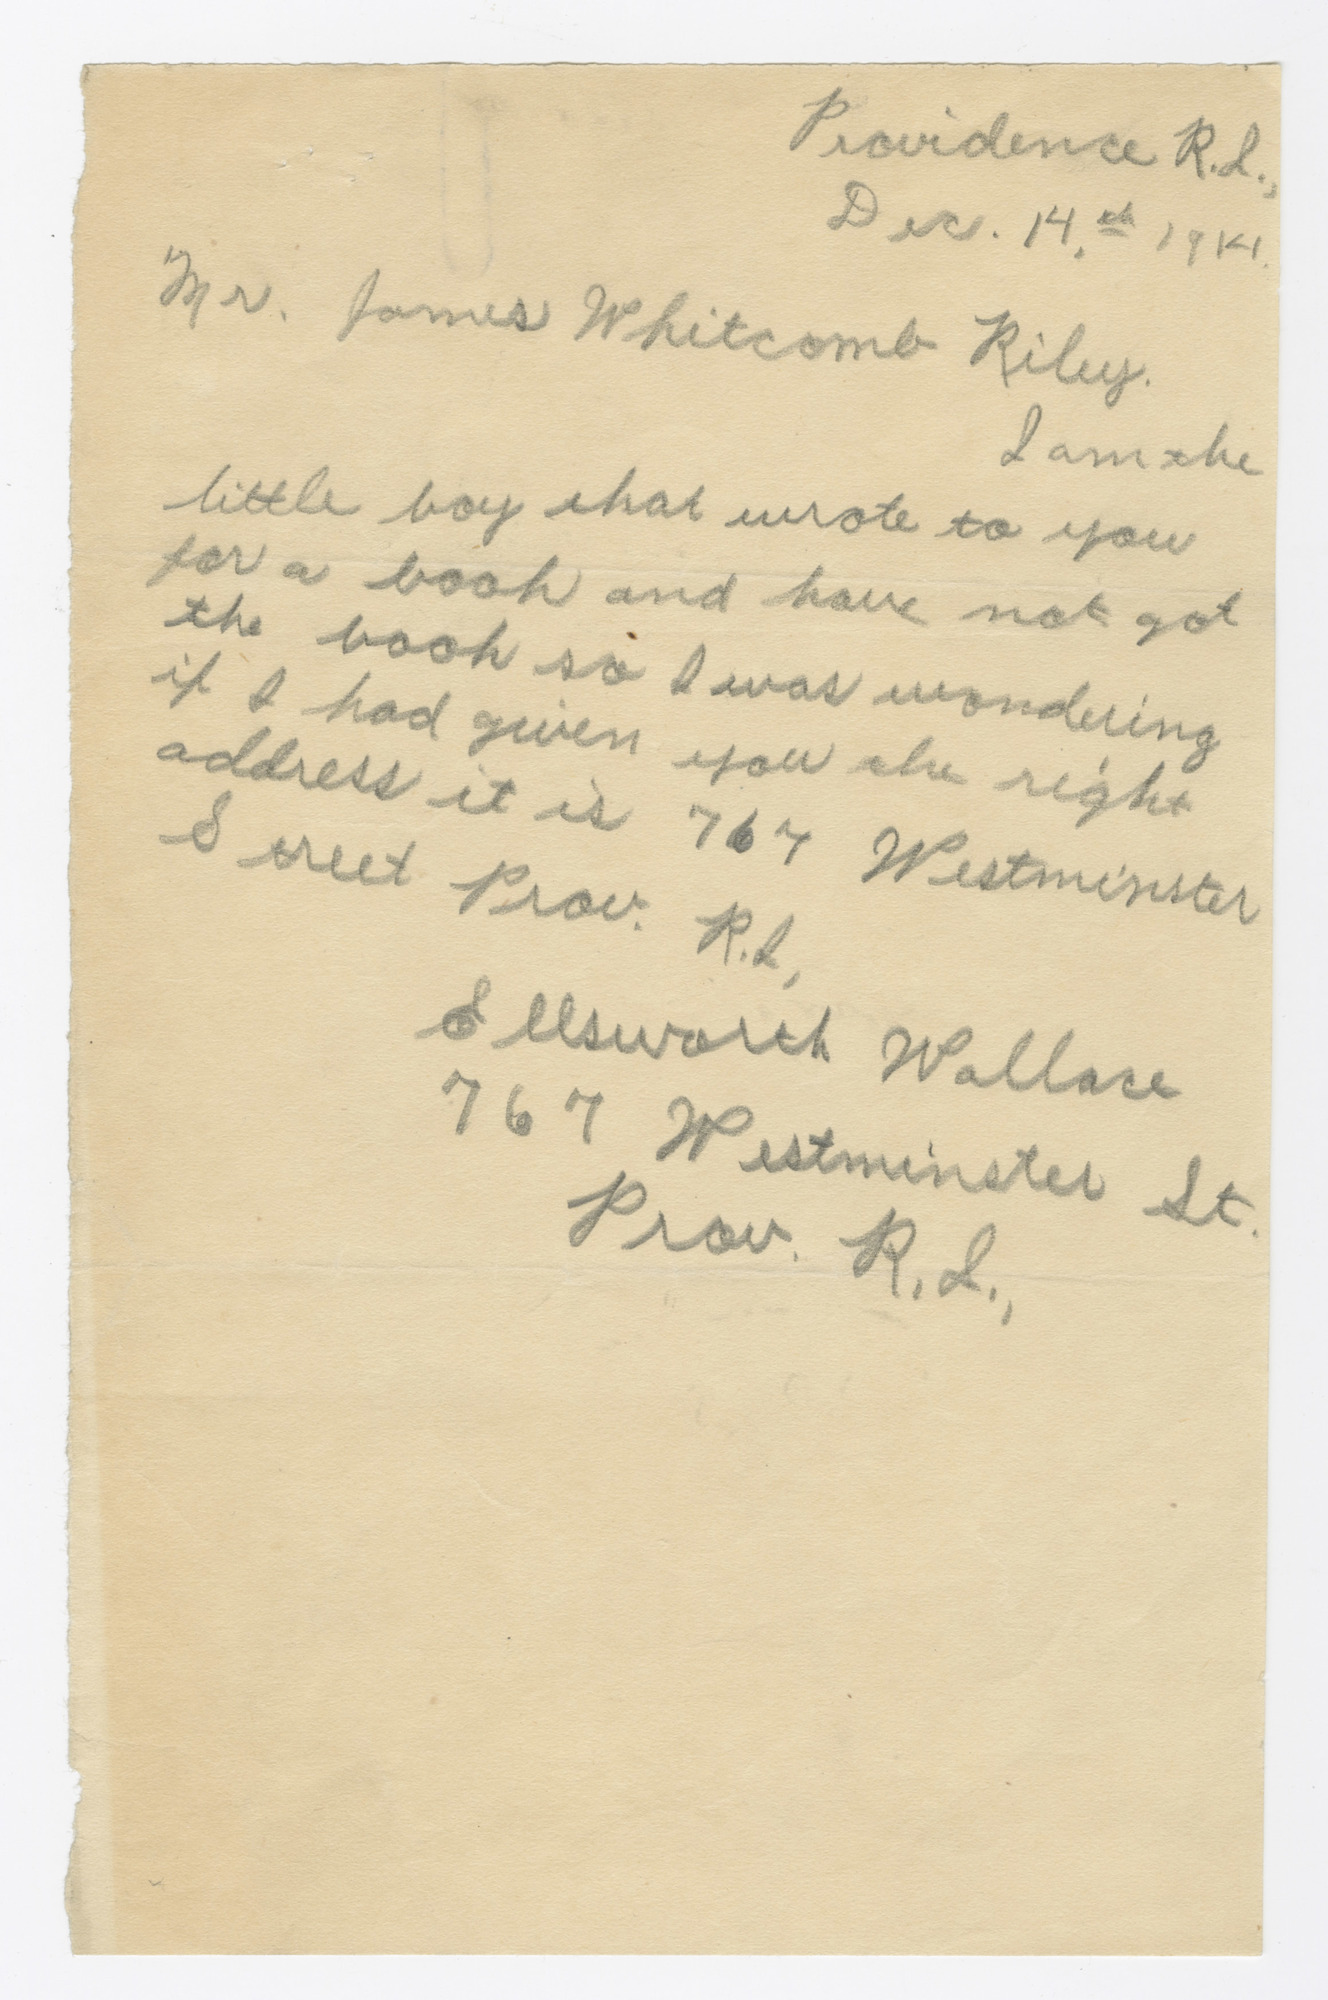 Letter from Ellsworth Wallace to James Whitcomb Riley, December 14, 1914.